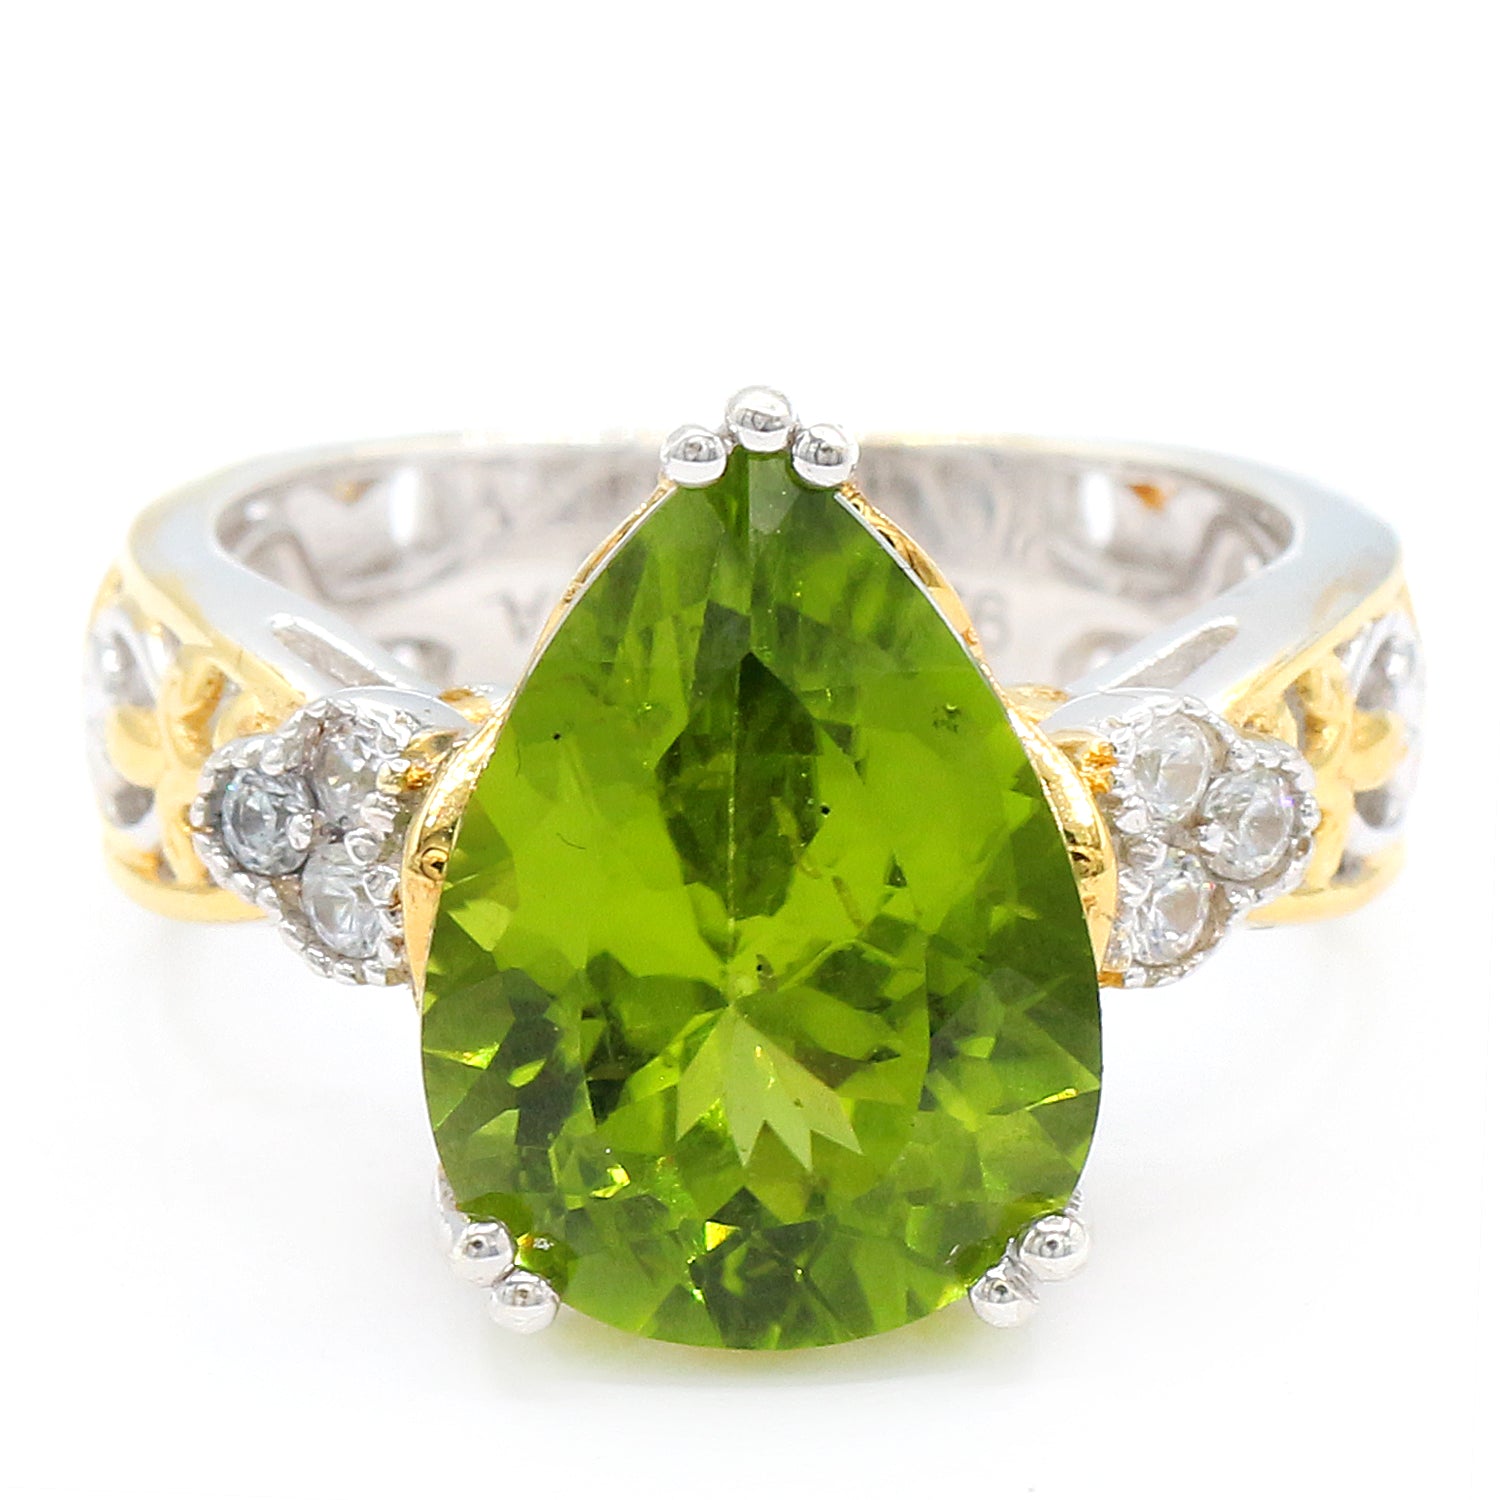 Gems en Vogue One-of-a-kind 7.89ctw Pearshaped Peridot & White Zircon Ring